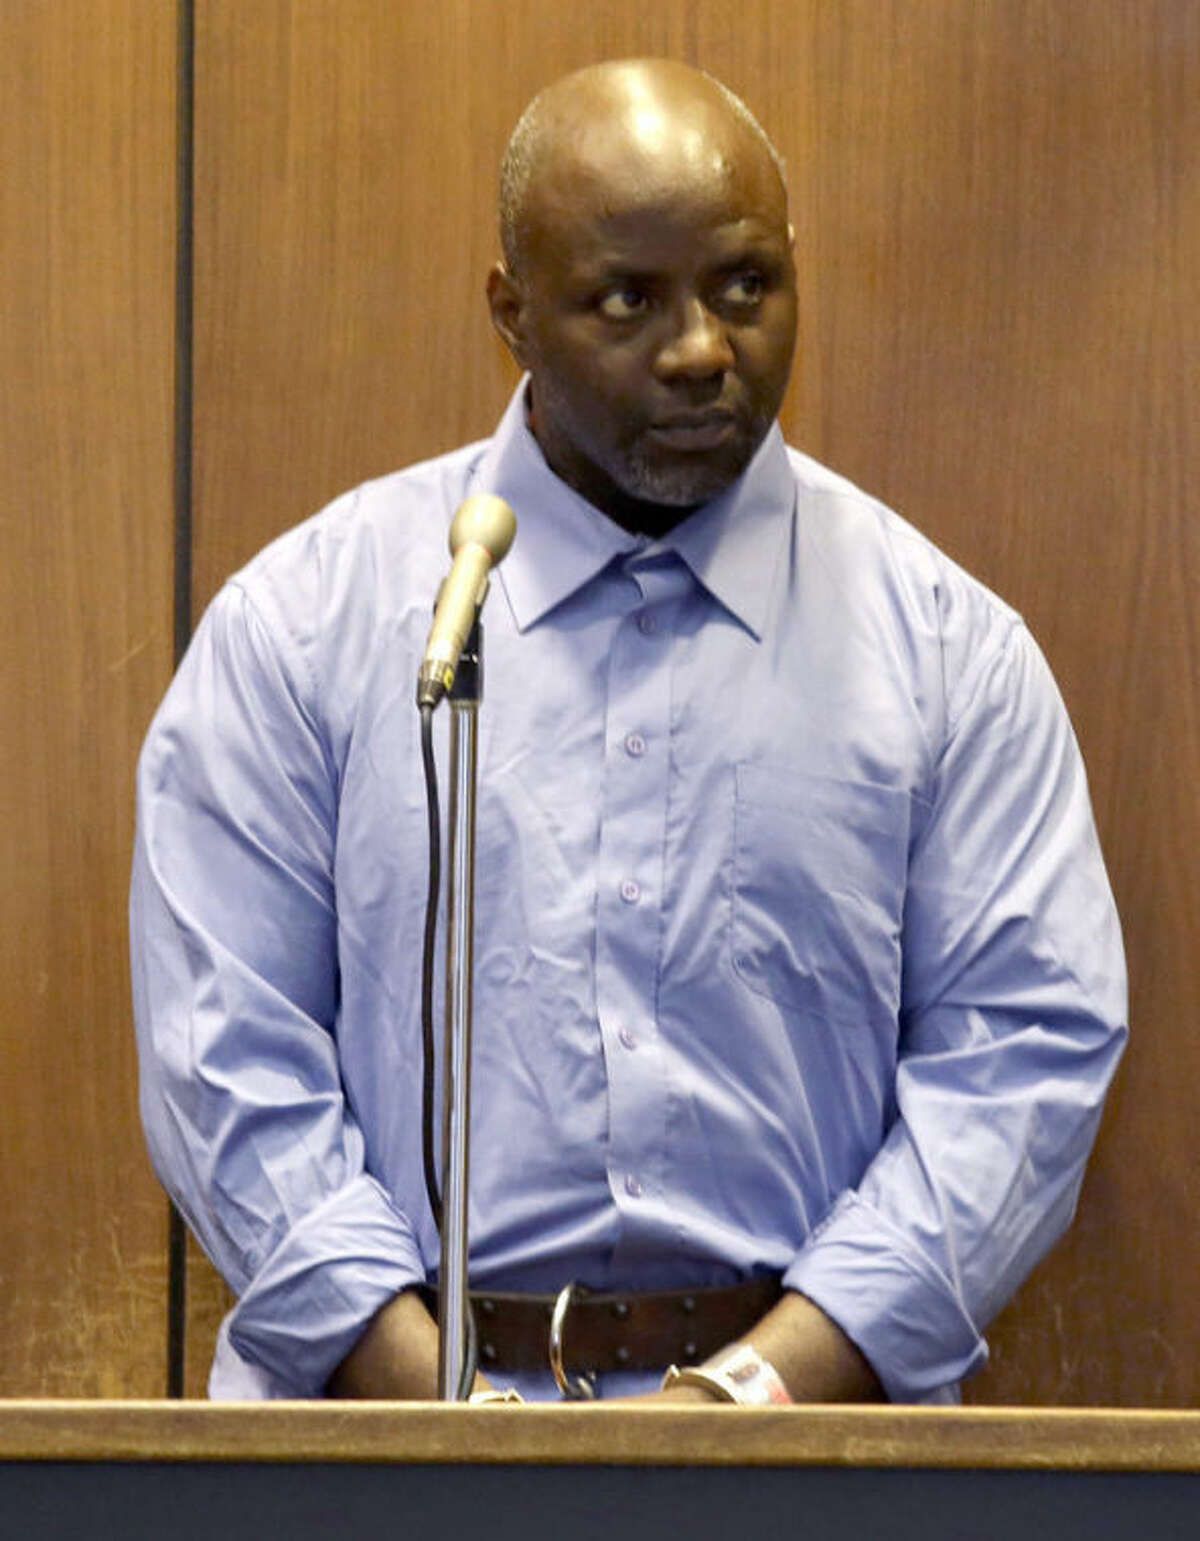 Shawn Custis appears in front of Judge Peter Vazquez for his arraignment at Essex County Superior Court, Tuesday, July 2, 2013, in Newark, N.J. Custis, 42, was arrested in connection with a violent home invasion on June 21, that left a mother beaten in an attack that was captured by nanny cam. (AP Photo/Julio Cortez)